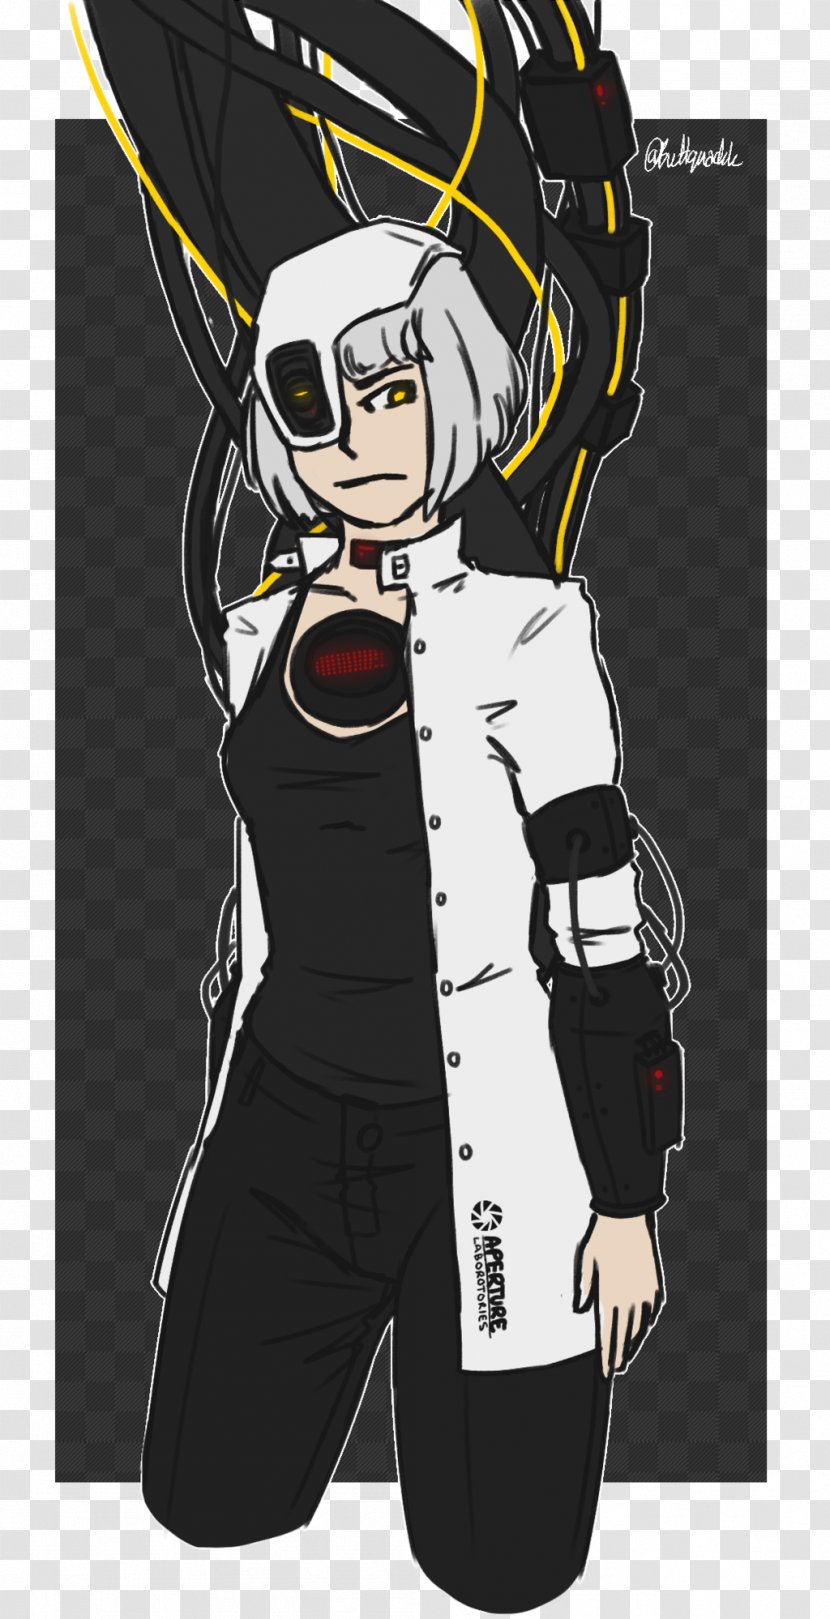 Costume Design Poster Character - Silhouette - Glados Transparent PNG